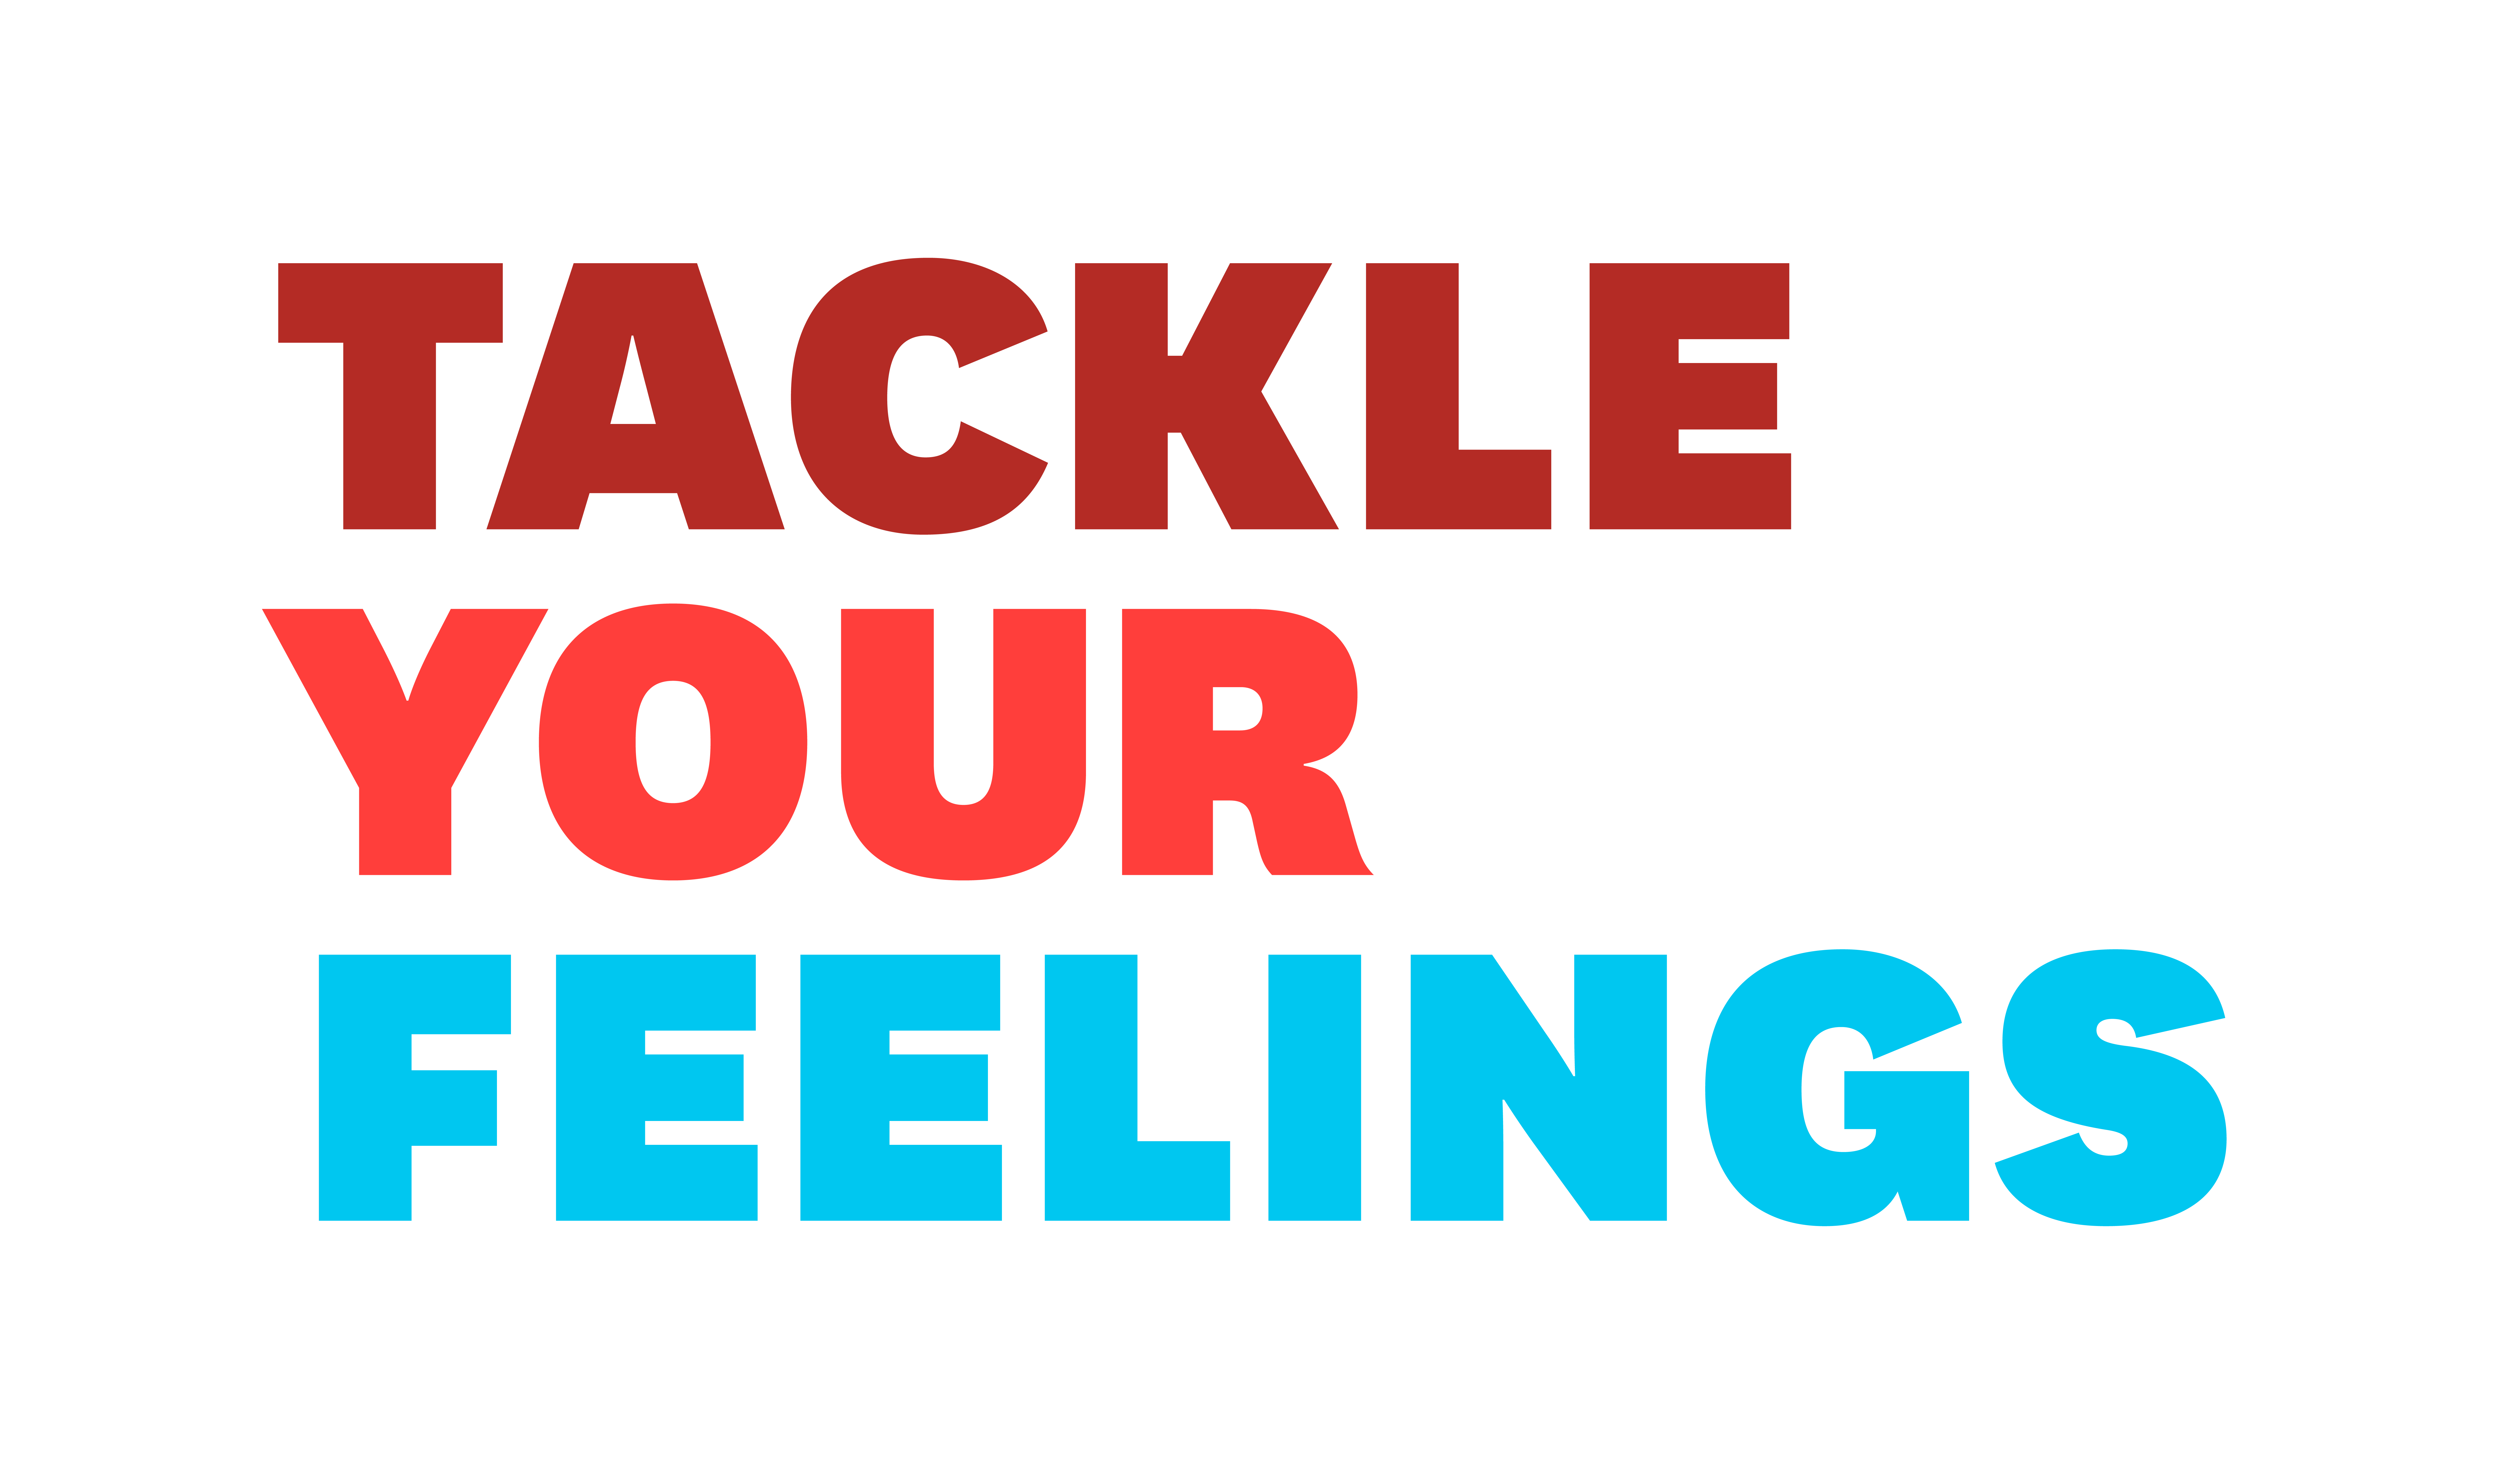 Tackle Your Feelings